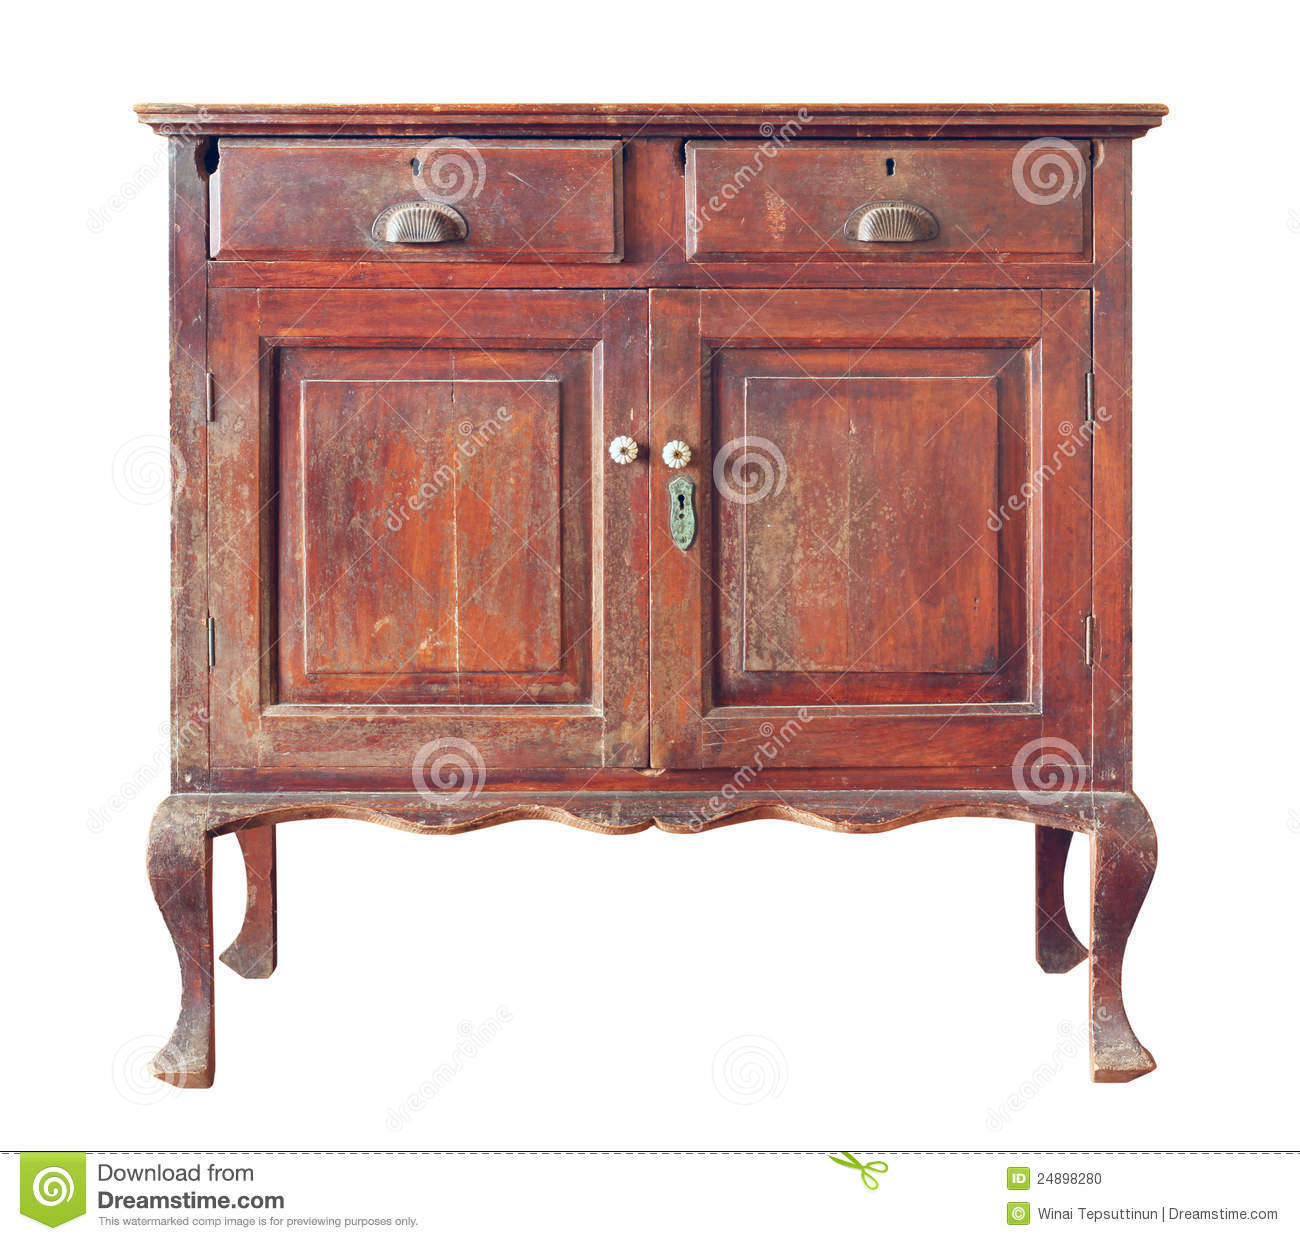 Wooden Cabinet Stock Photo   Image  24898280